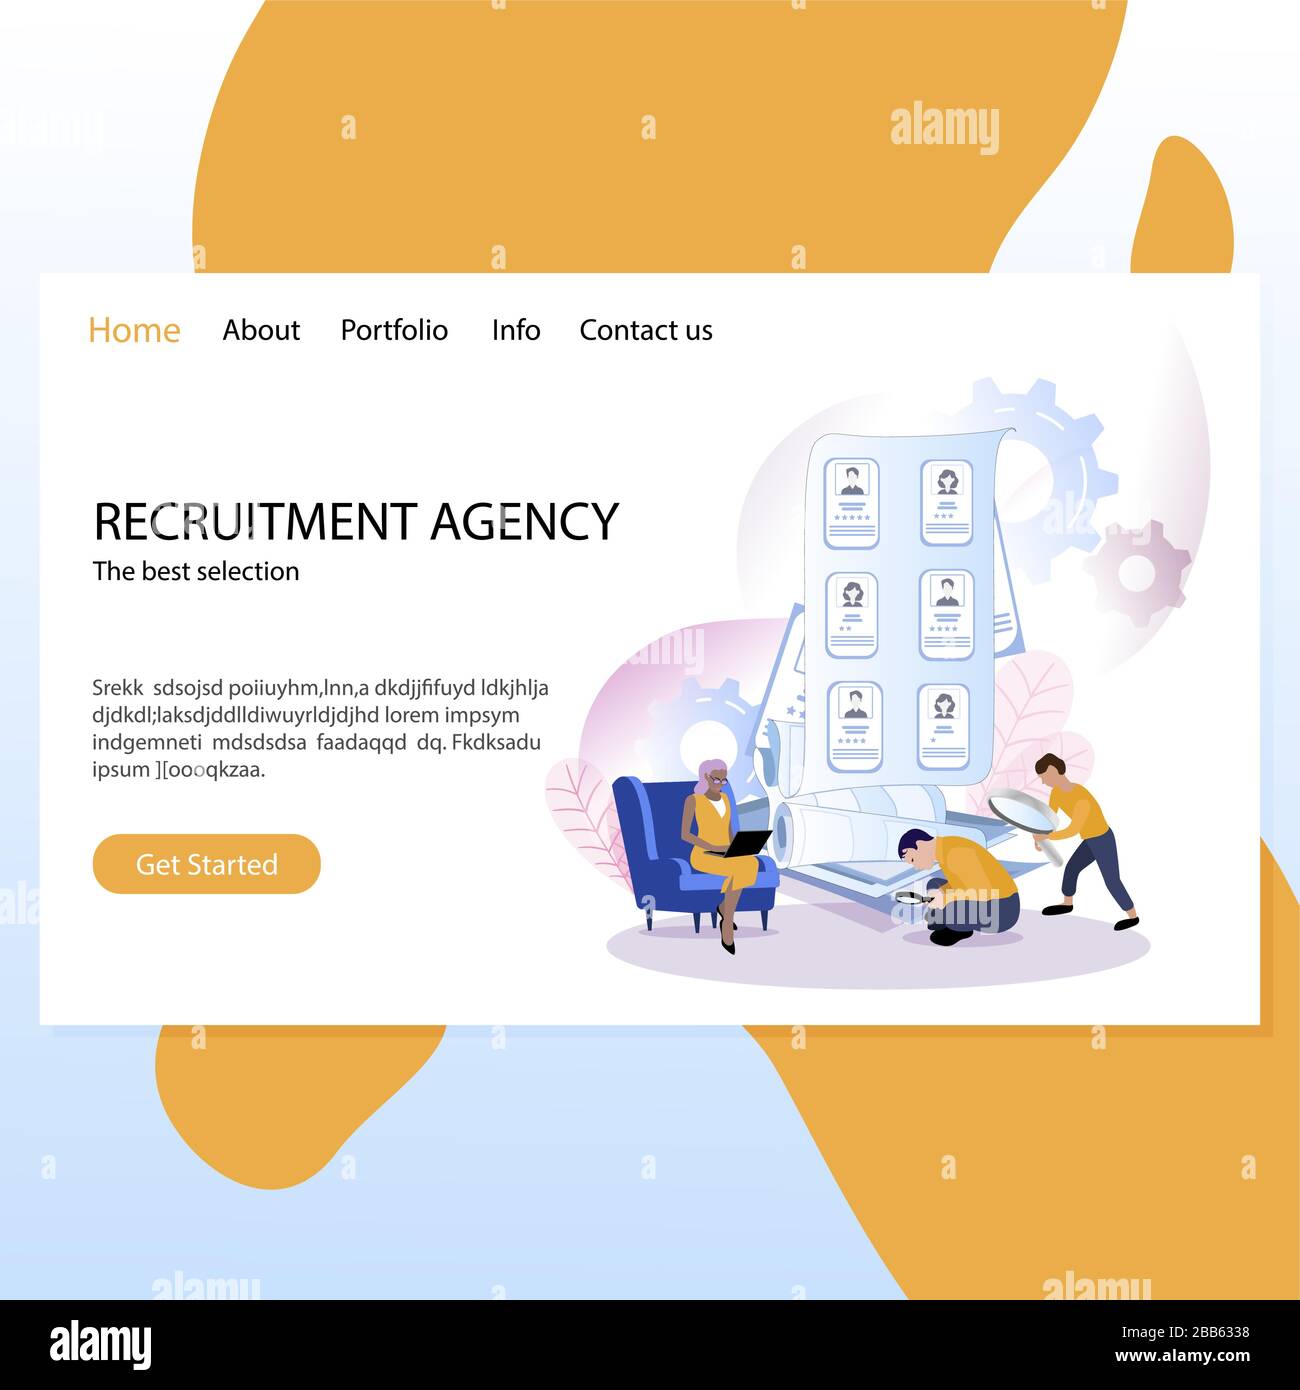 Recruitment agency mockup website, landing page. Illustration recruitment and employment, company hire candidate, team choosing and select, cv recruit Stock Vector